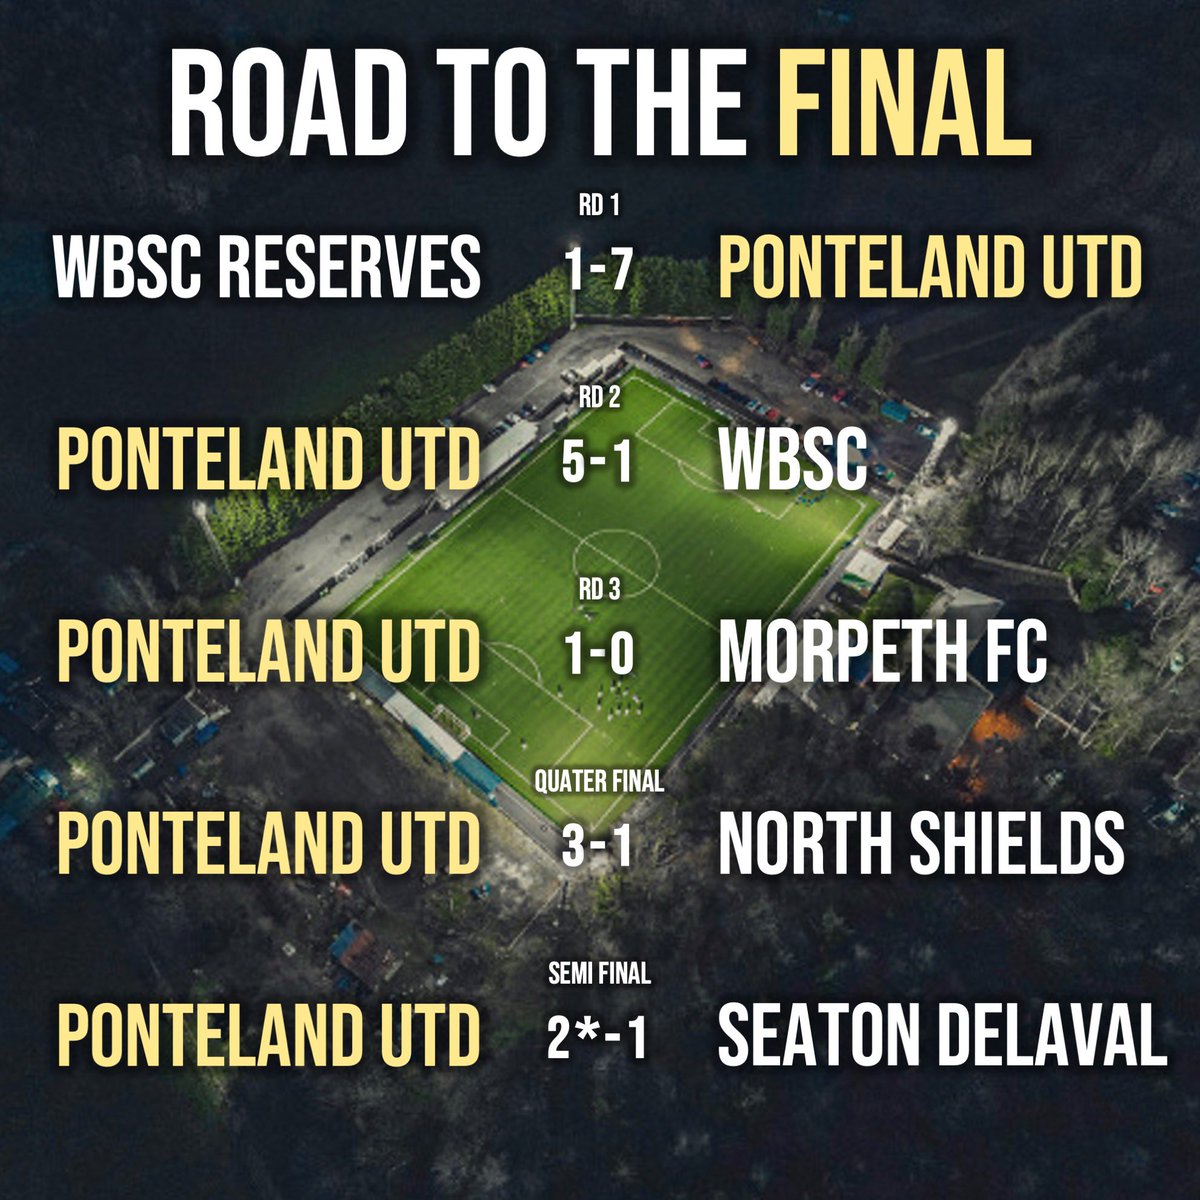 CUP RUN 👣 | With just over 24 hours to go here is how United have got themselves to the final. #PUFC #UTP #SupportLocal